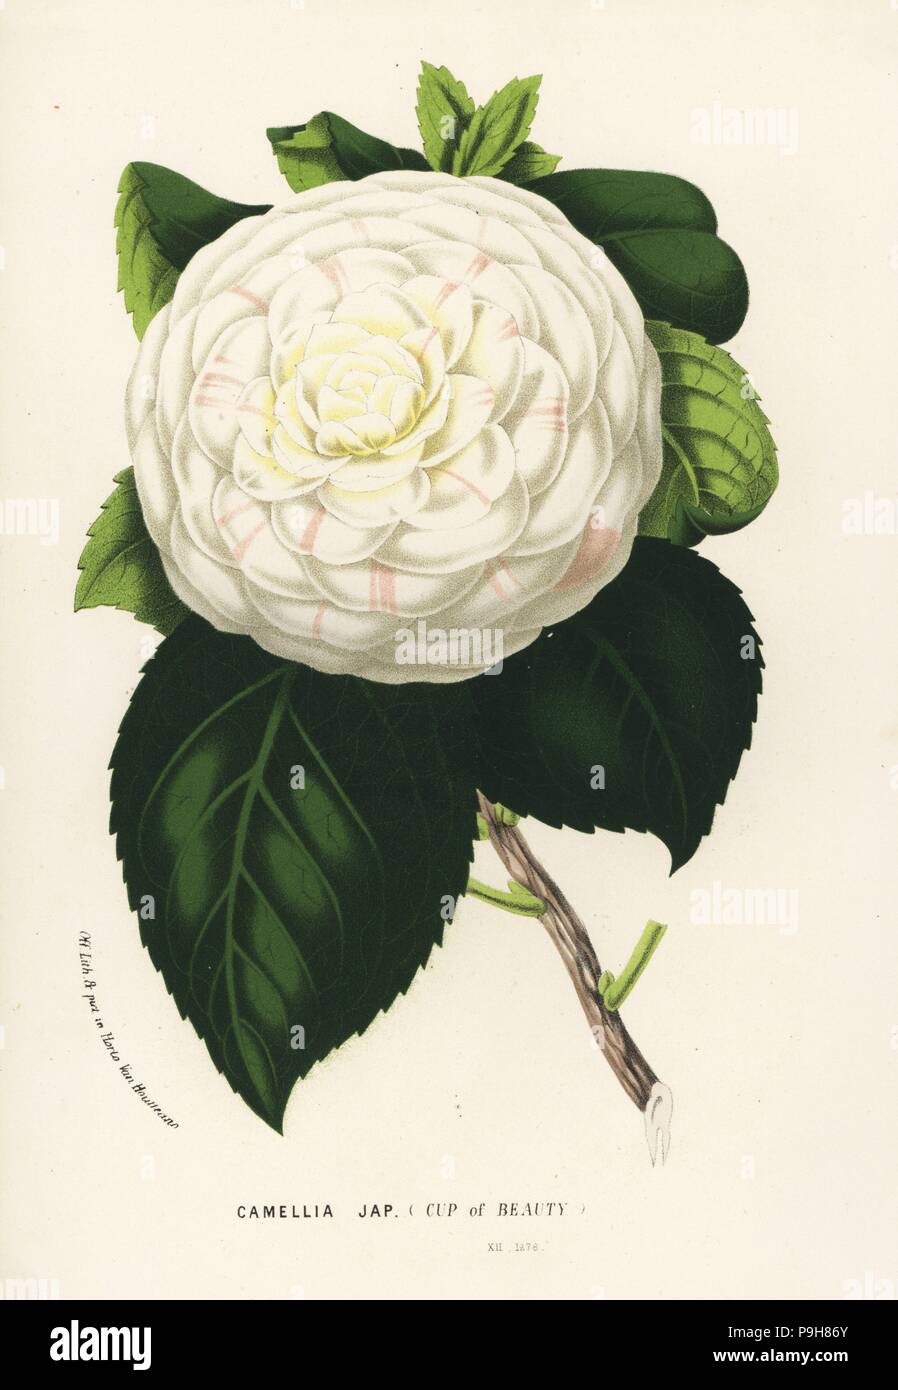 Cup of Beauty, hybrid camellia, Camellia japonica. Handcoloured lithograph from Louis van Houtte and Charles Lemaire's Flowers of the Gardens and Hothouses of Europe, Flore des Serres et des Jardins de l'Europe, Ghent, Belgium, 1867-1868. Stock Photo